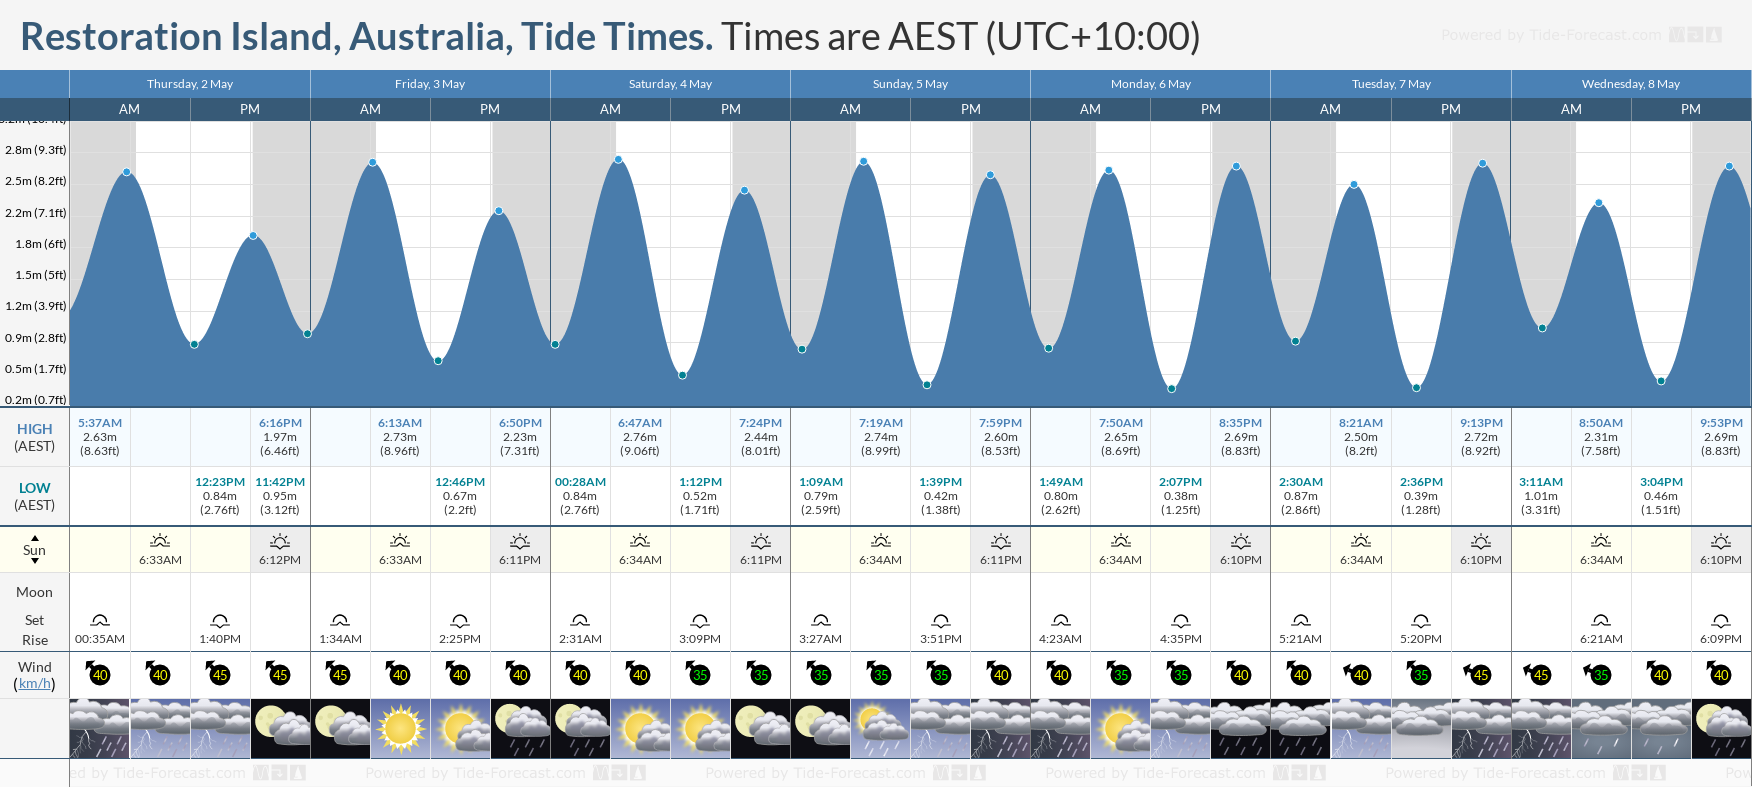 Restoration Island, Australia Tide Chart including high and low tide times for the next 7 days